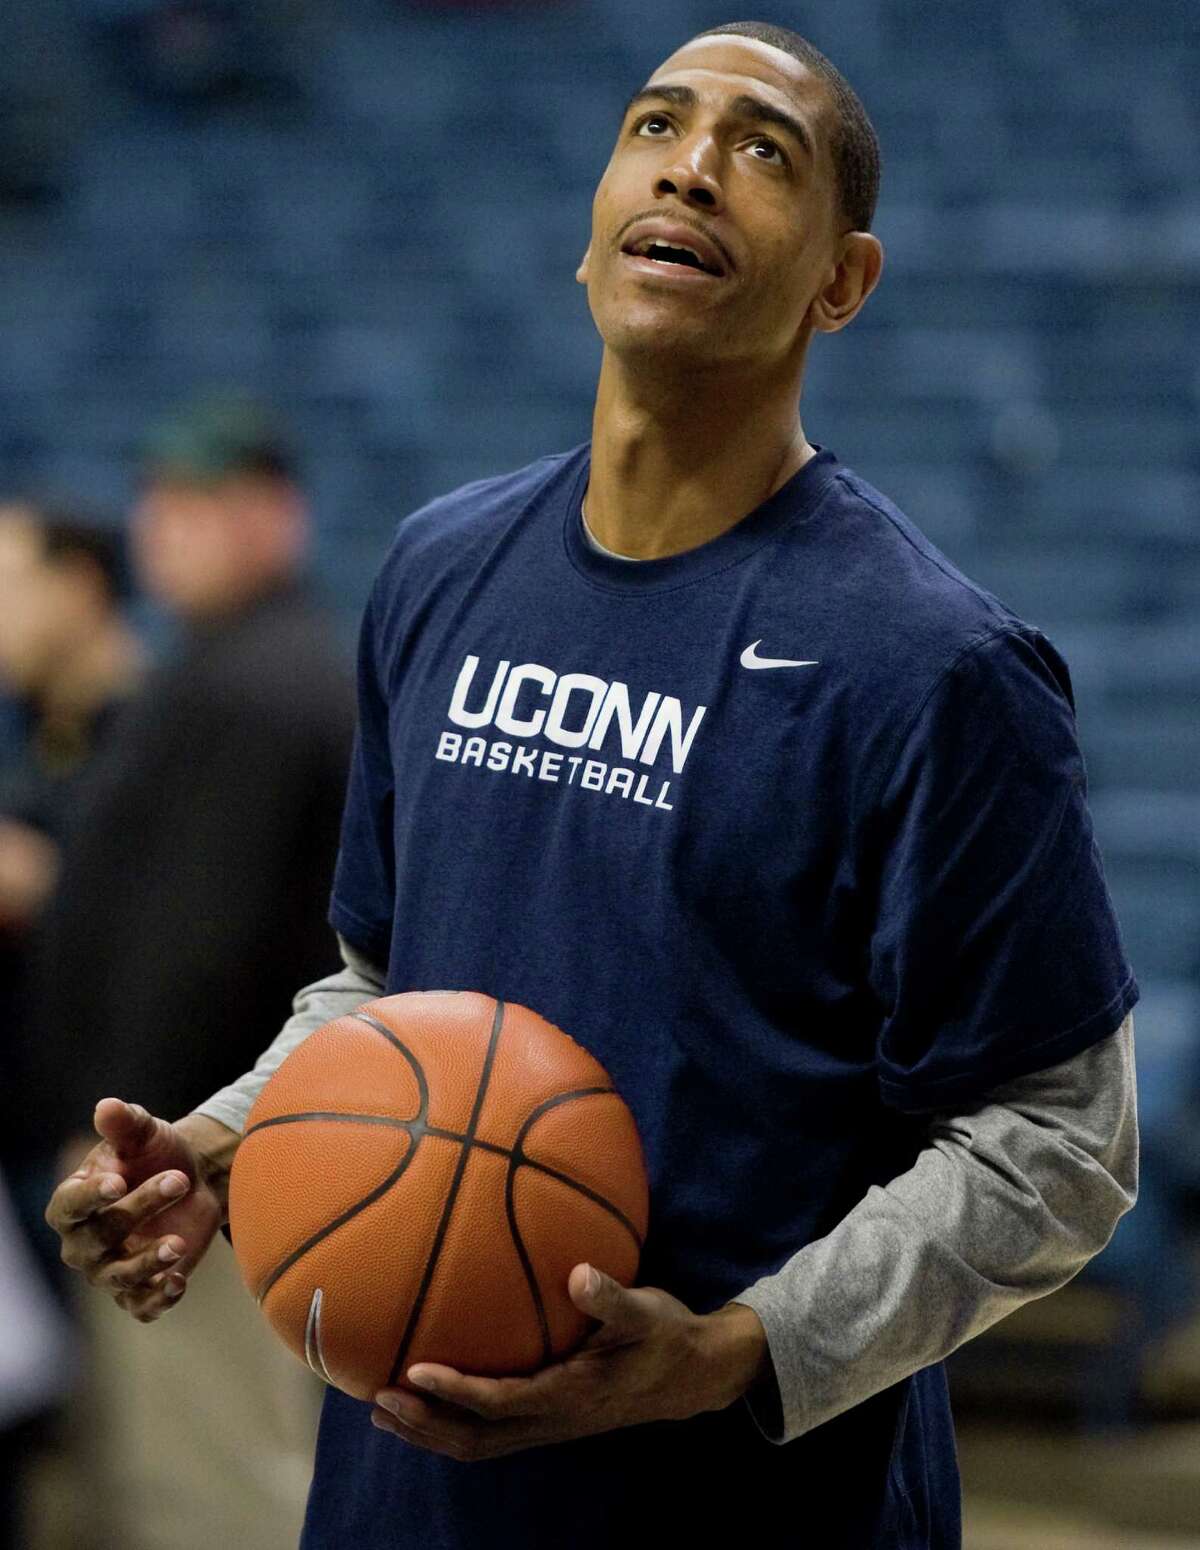 Connecticut assistant coach Kevin Ollie watches practice at the University of Connecticut in Storrs, Conn., Friday, Feb. 3, 2012. (AP Photo/Jessica Hill)